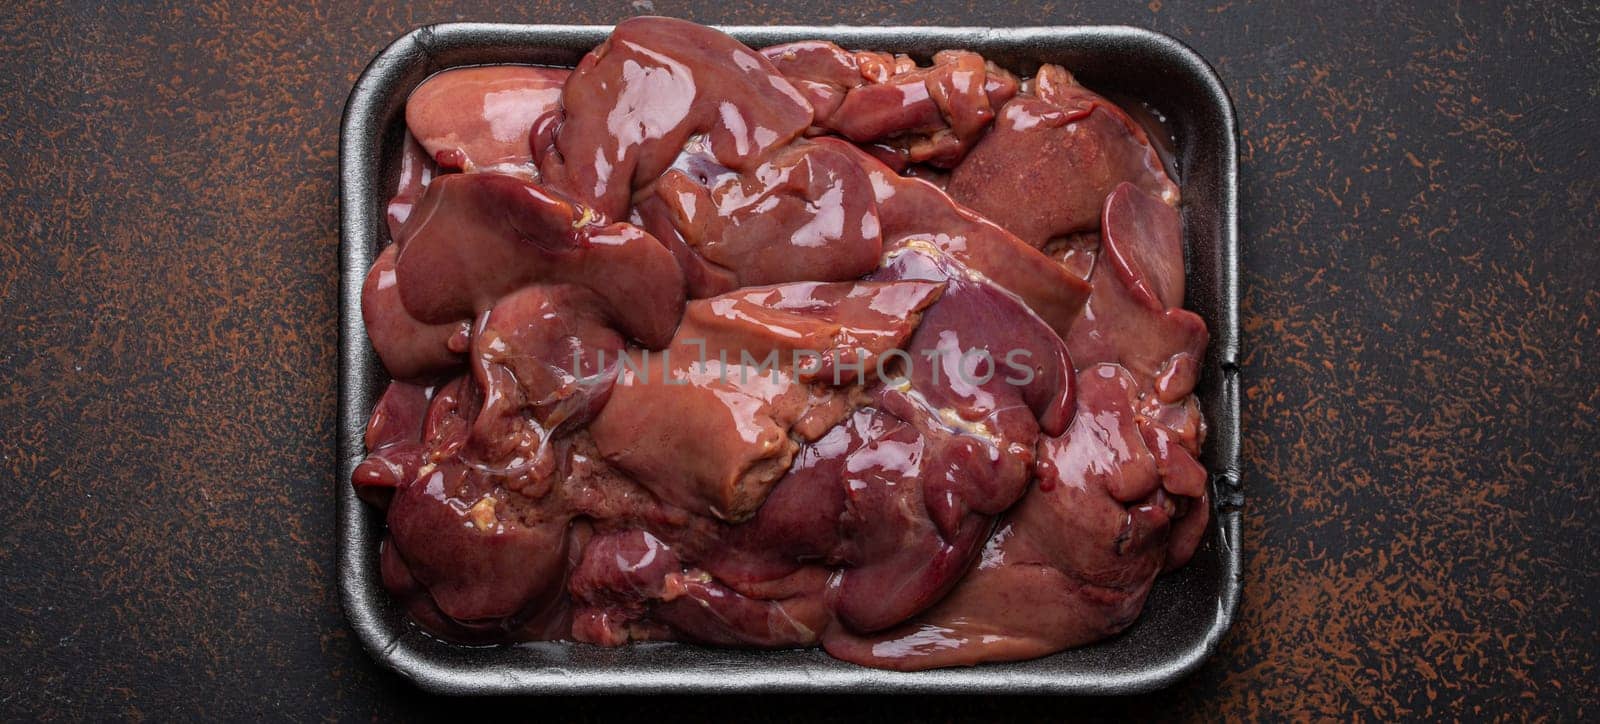 Raw chicken liver in black supermarket tray top view on dark rustic concrete background kitchen table. Healthy food ingredient, source of iron, folate and variety of vitamins and minerals by its_al_dente